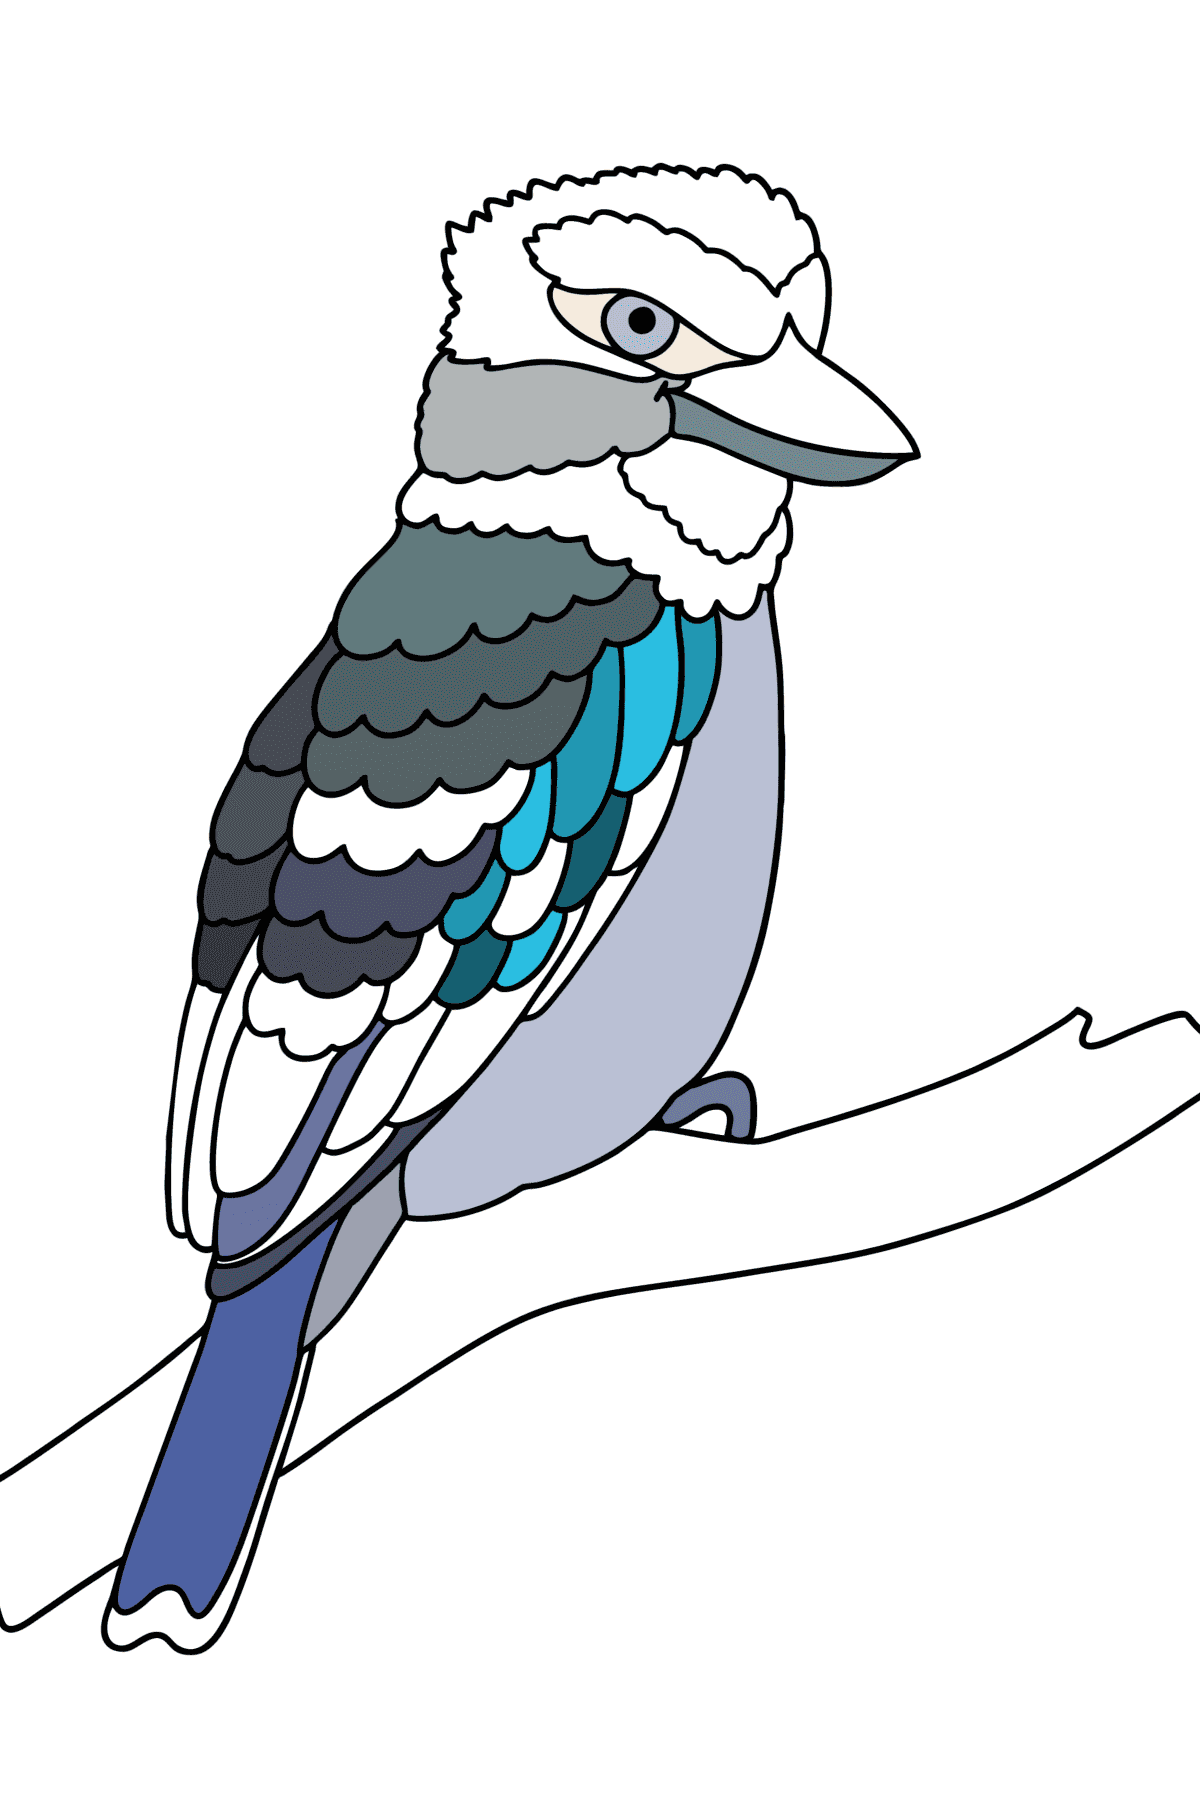 Kookaburra сoloring page - Coloring Pages for Kids